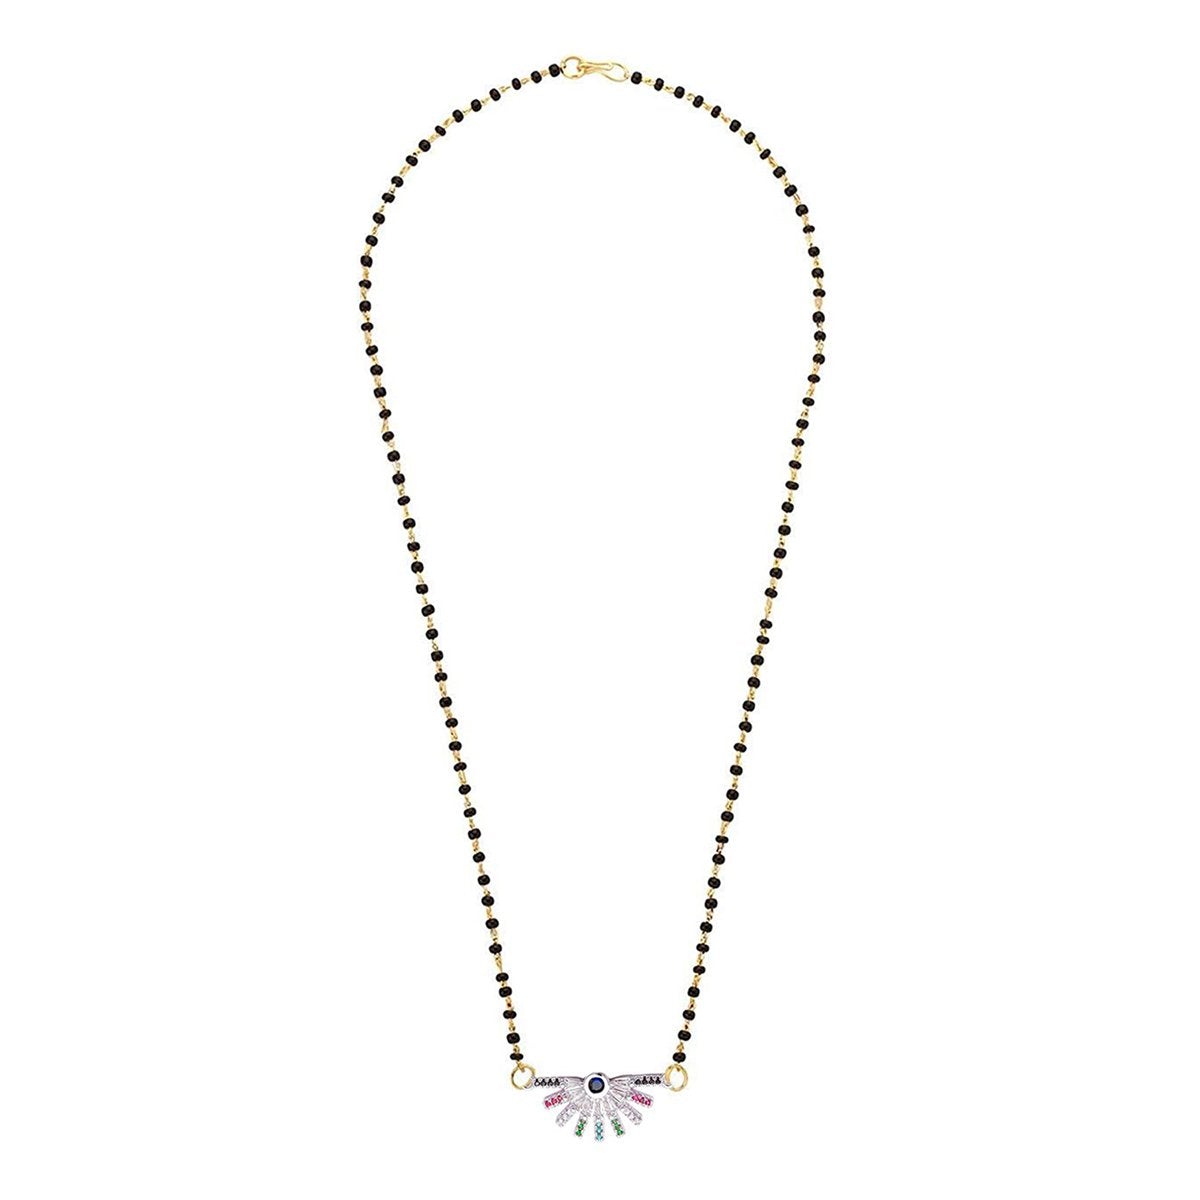 Stylish Delicate Rainbow Colourful Silver Mangalsutra Chain Necklace